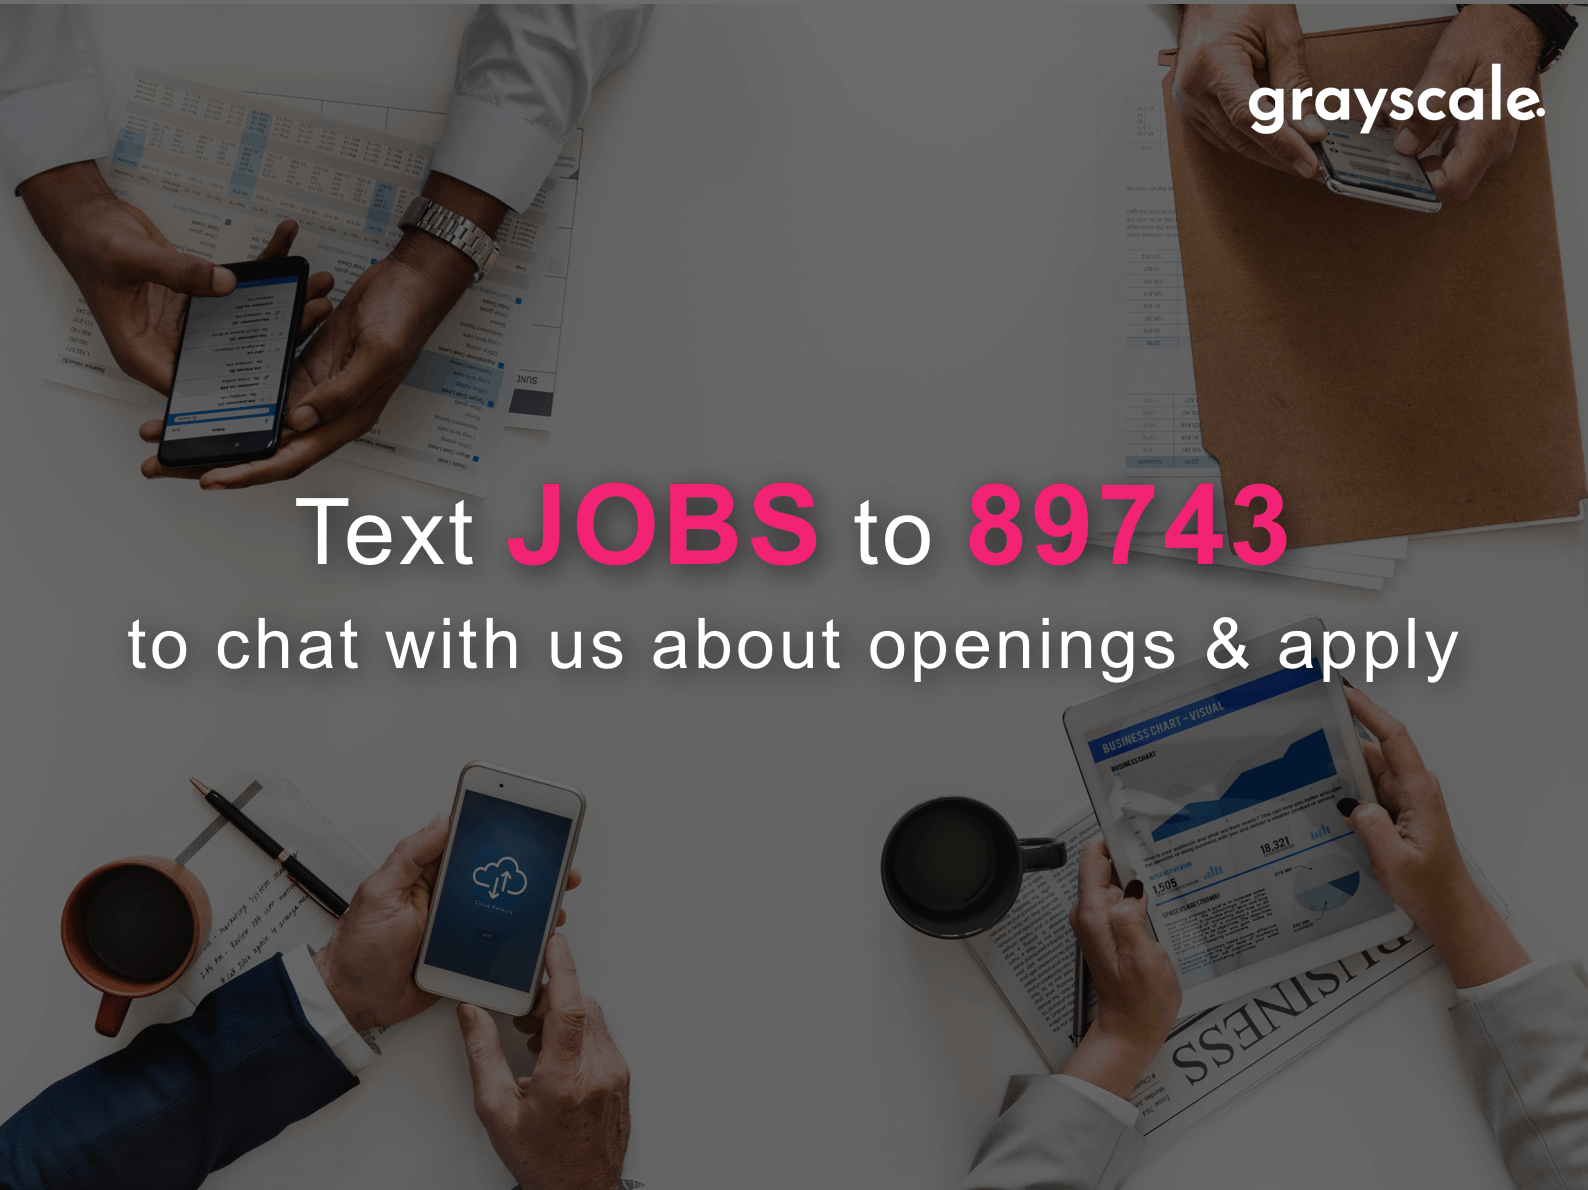 Grayscale - Text Message Recruiting Example